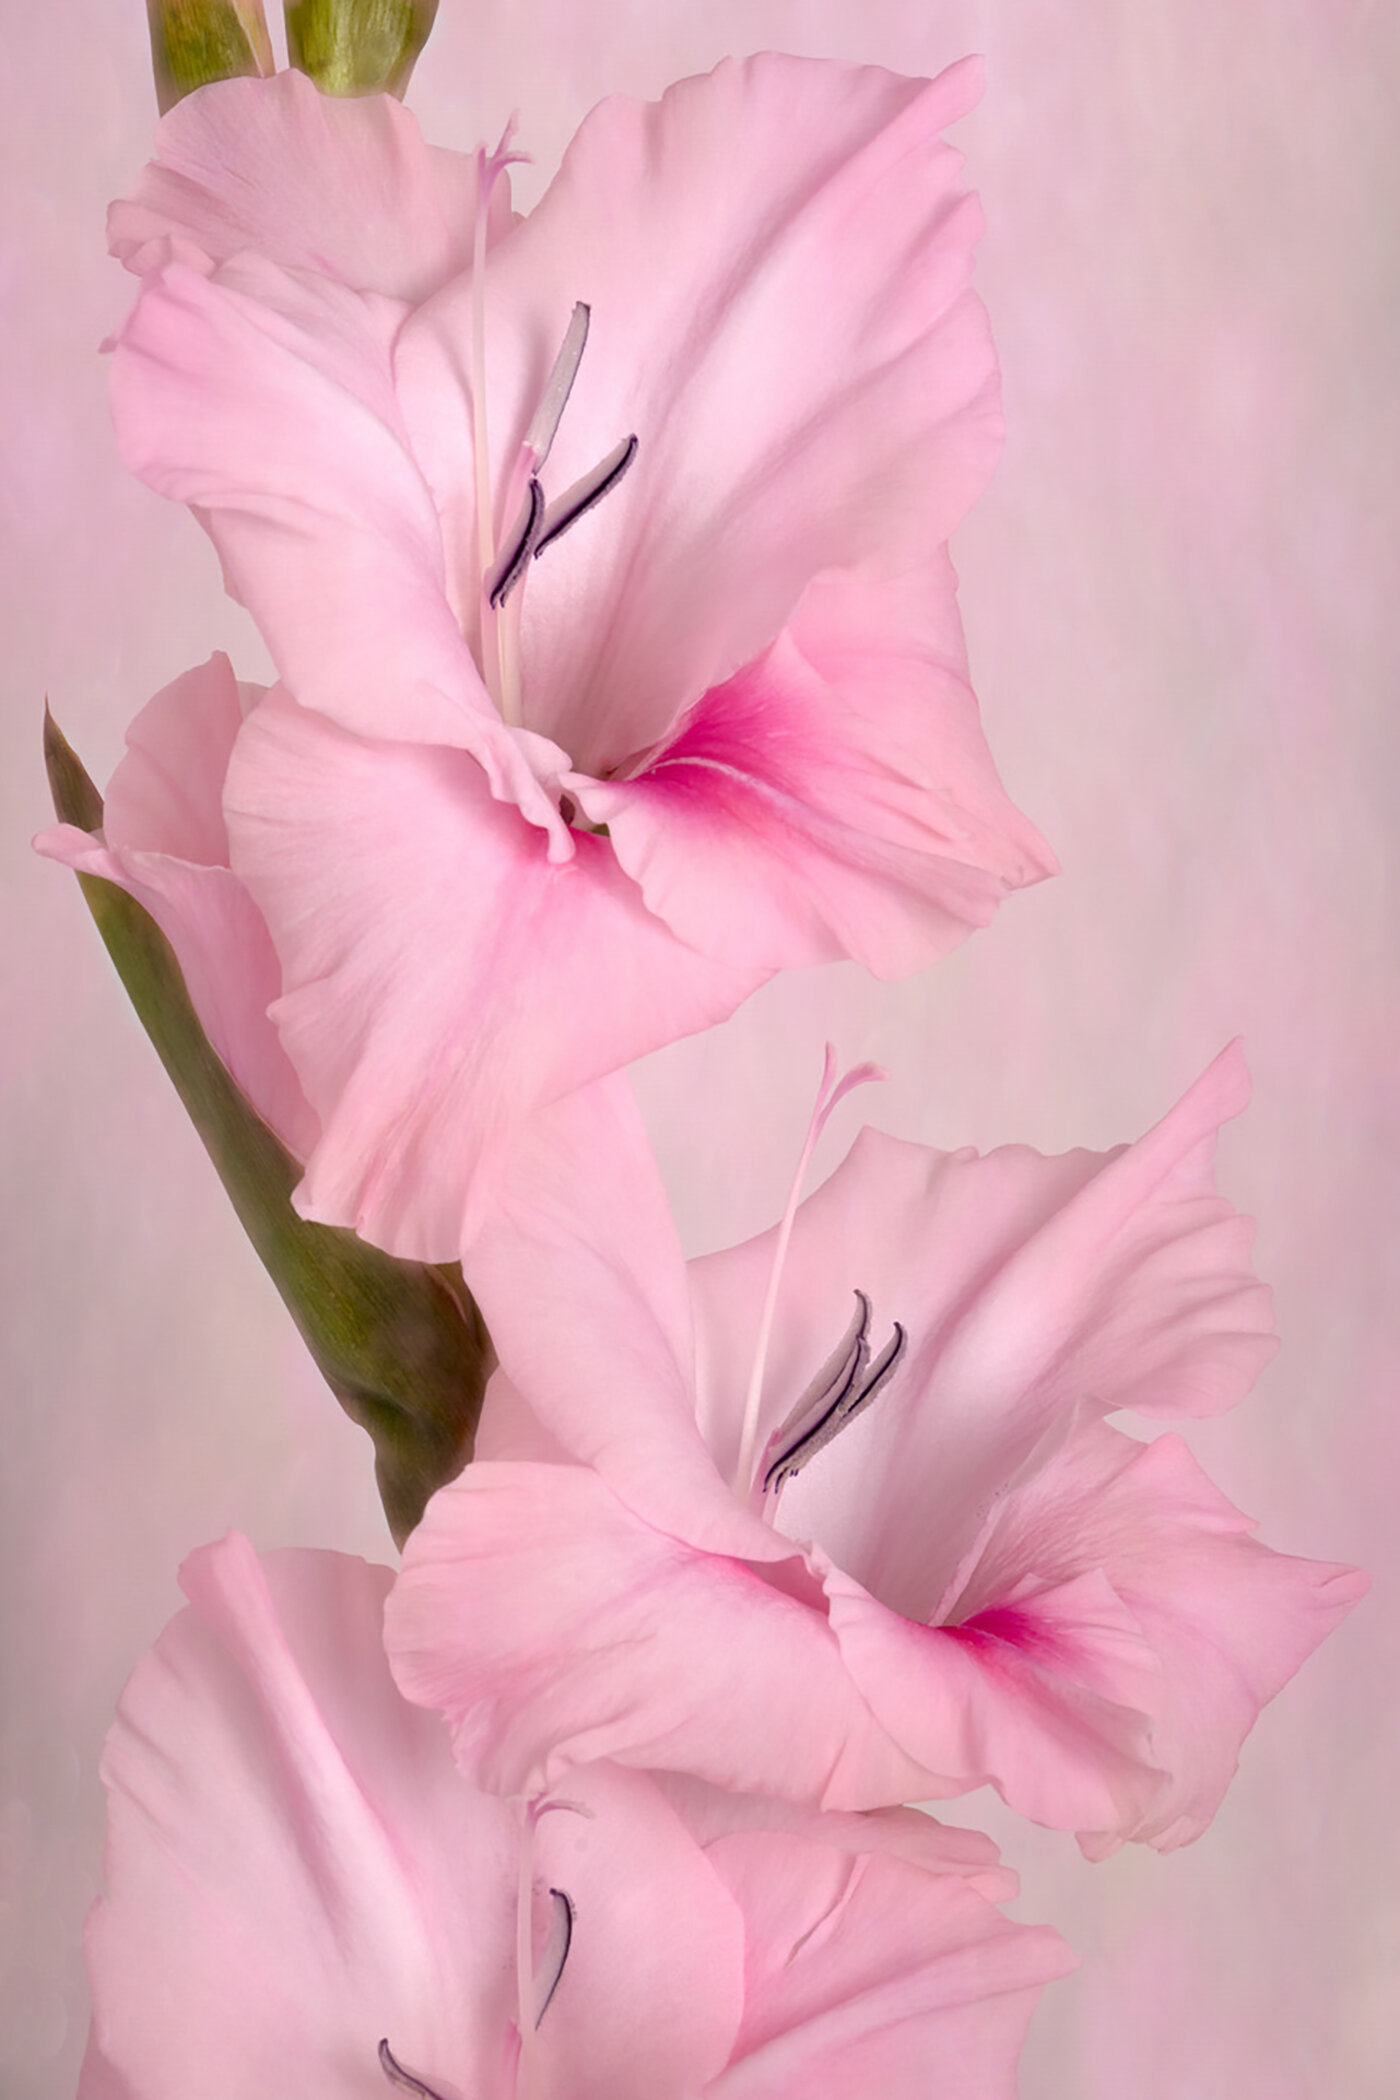 Open 3rd place - Pink Gladiolus - Diana Duffey